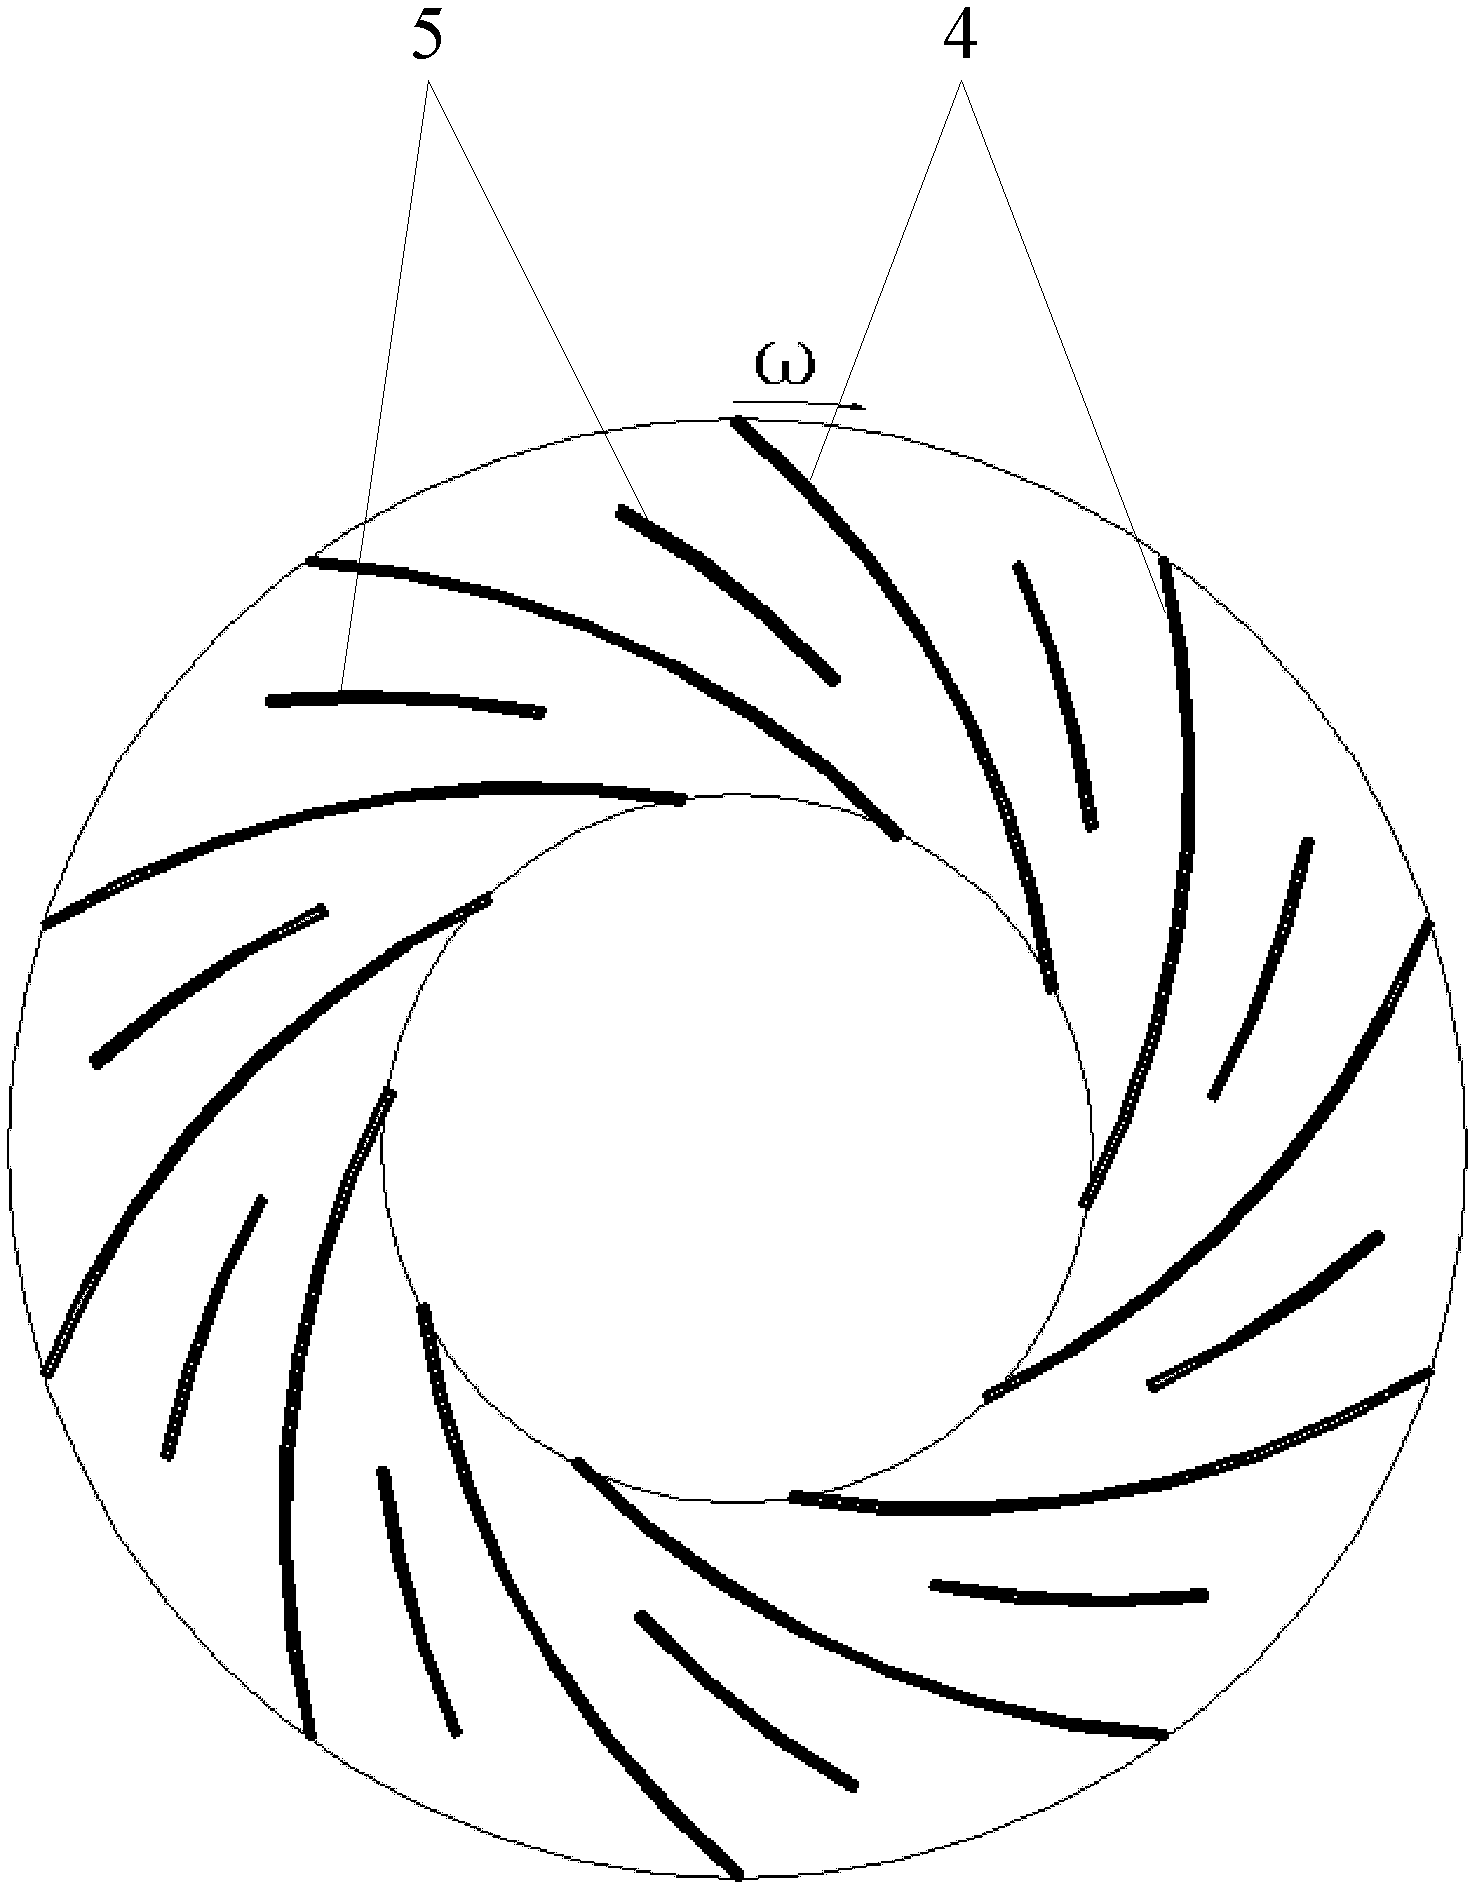 Impeller of centrifugal fan and centrifugal fan